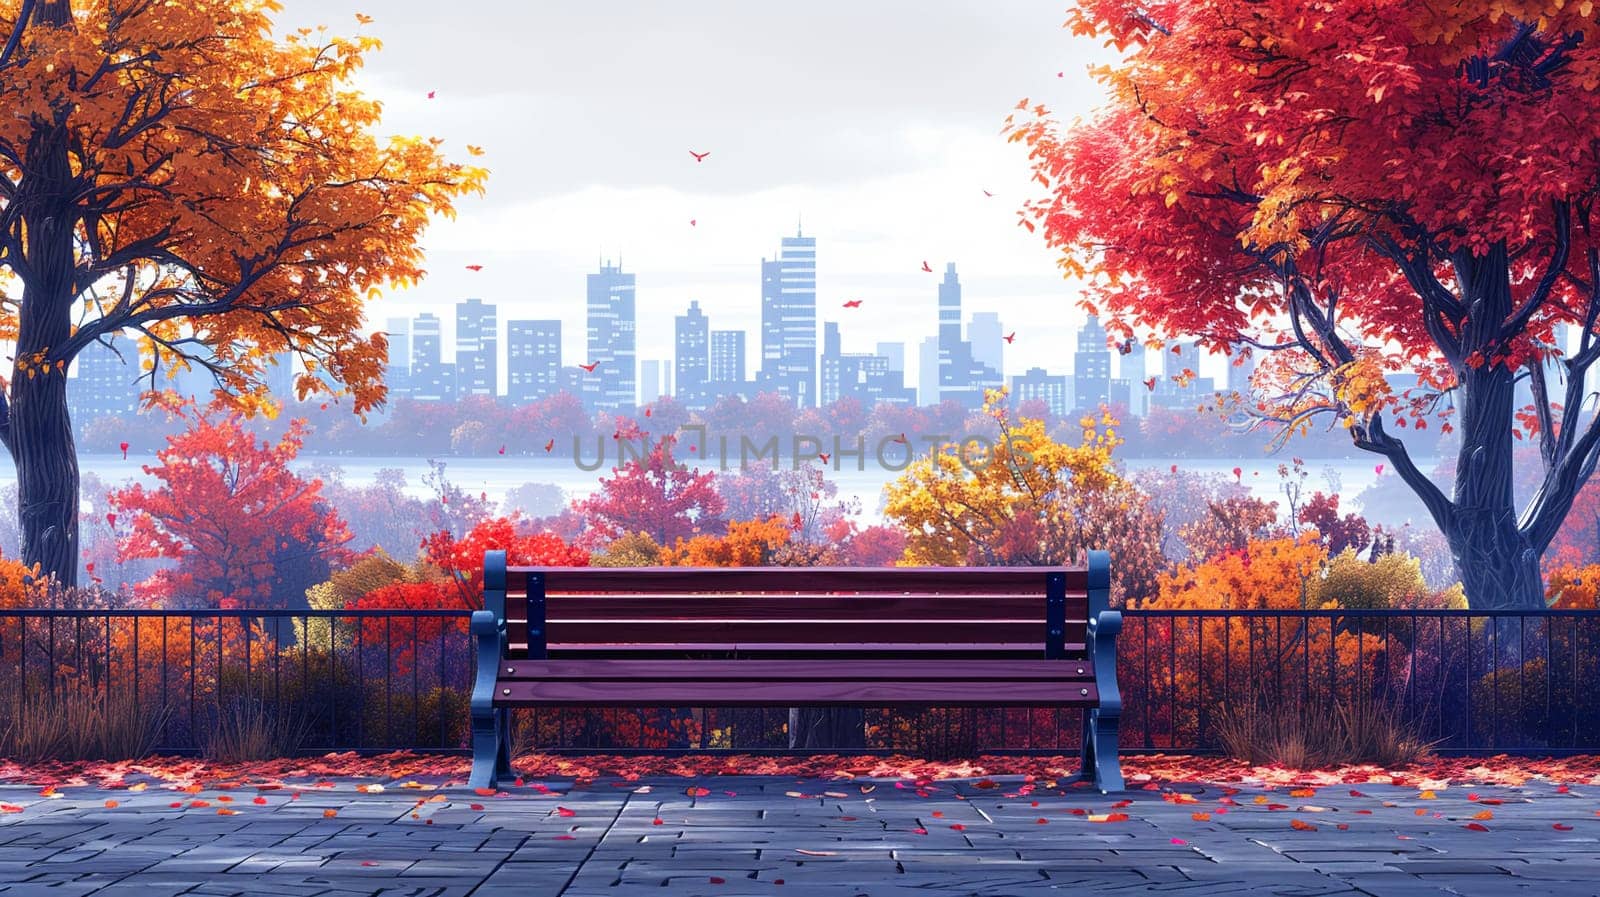 City bench moment depicted in minimalistic style by Benzoix